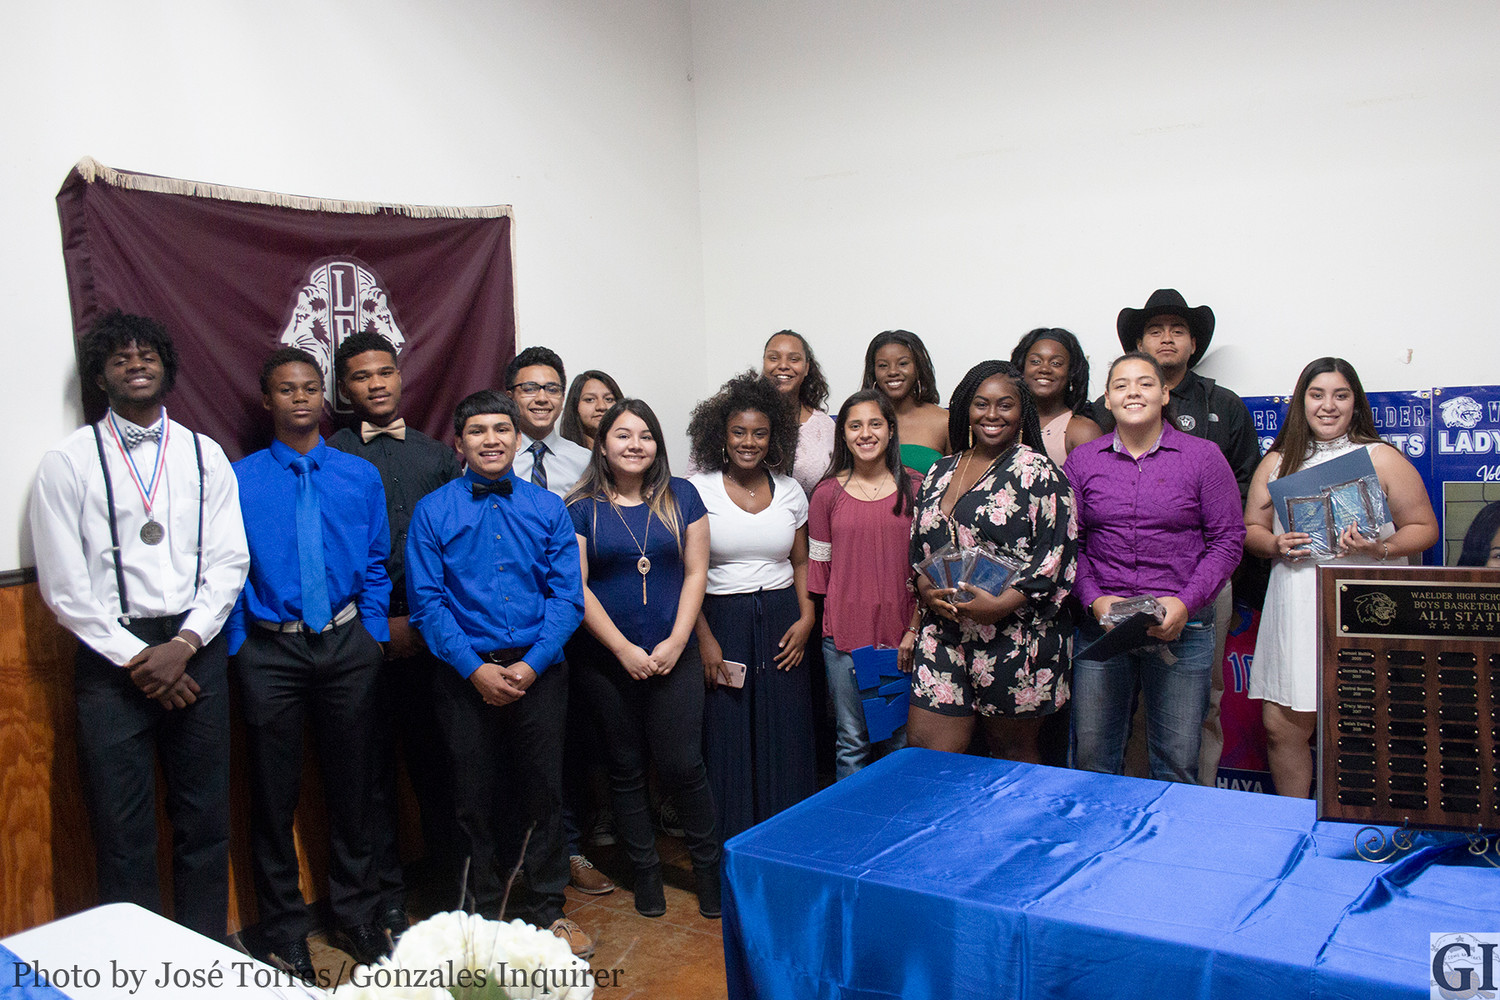 Waelder ISD held an athletic banquet last Friday to honor and celebrate their Wildcat athletes.